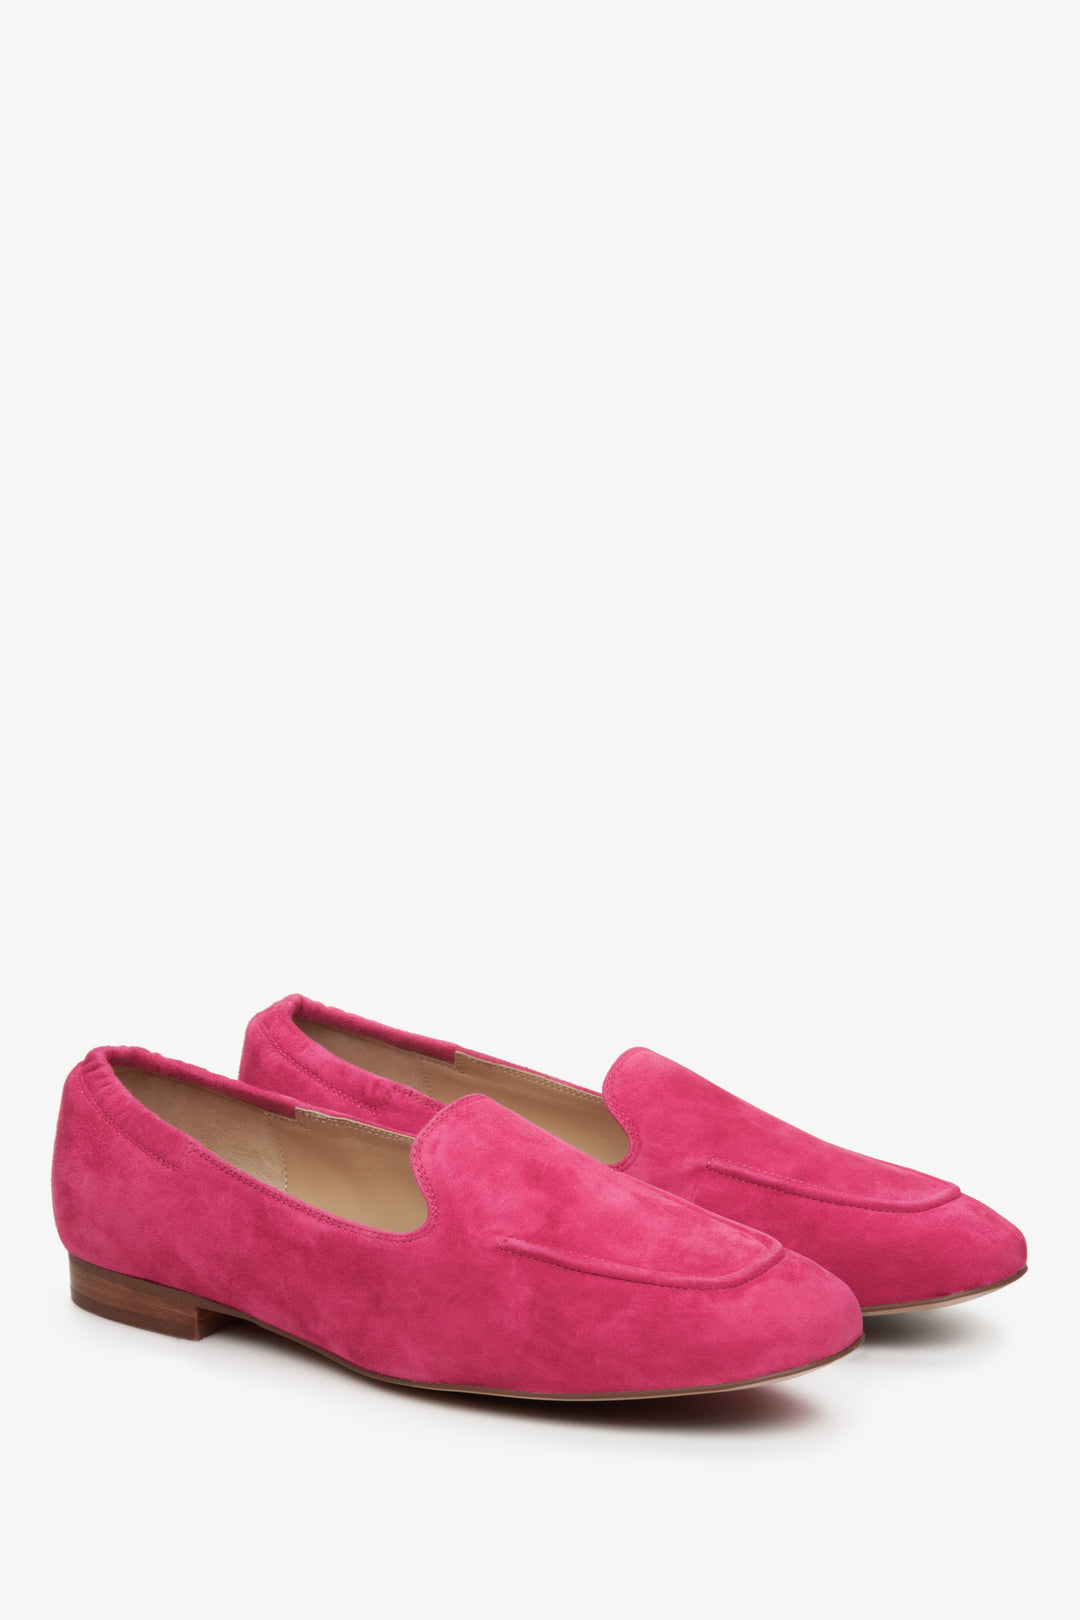 Women's fuchsia moccasins made of genuine velour - presentation of the toe and side vamp.